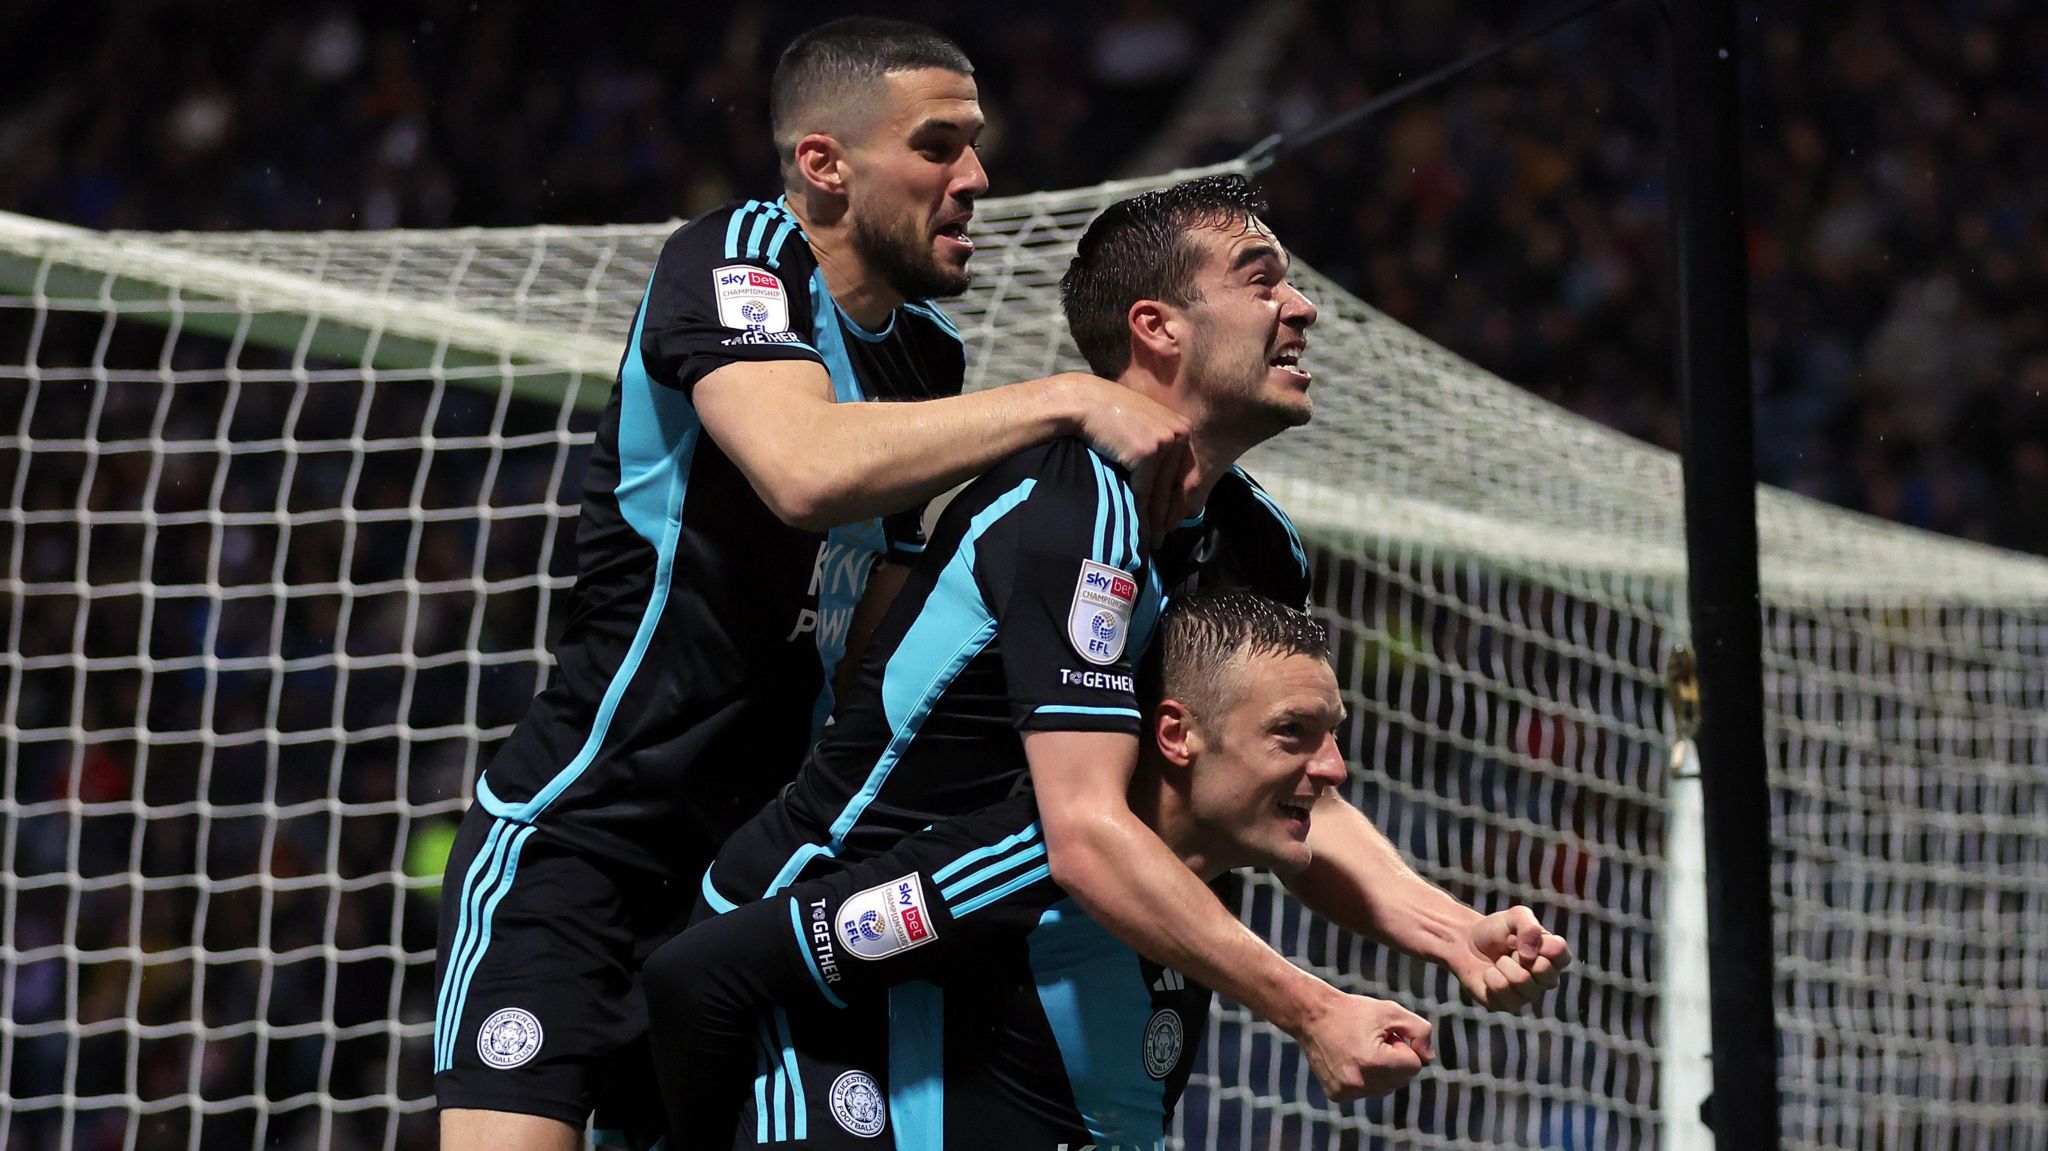 Leicester City's Conor Coady, Harry Winks and Jamie Vardy celebrate after a goal